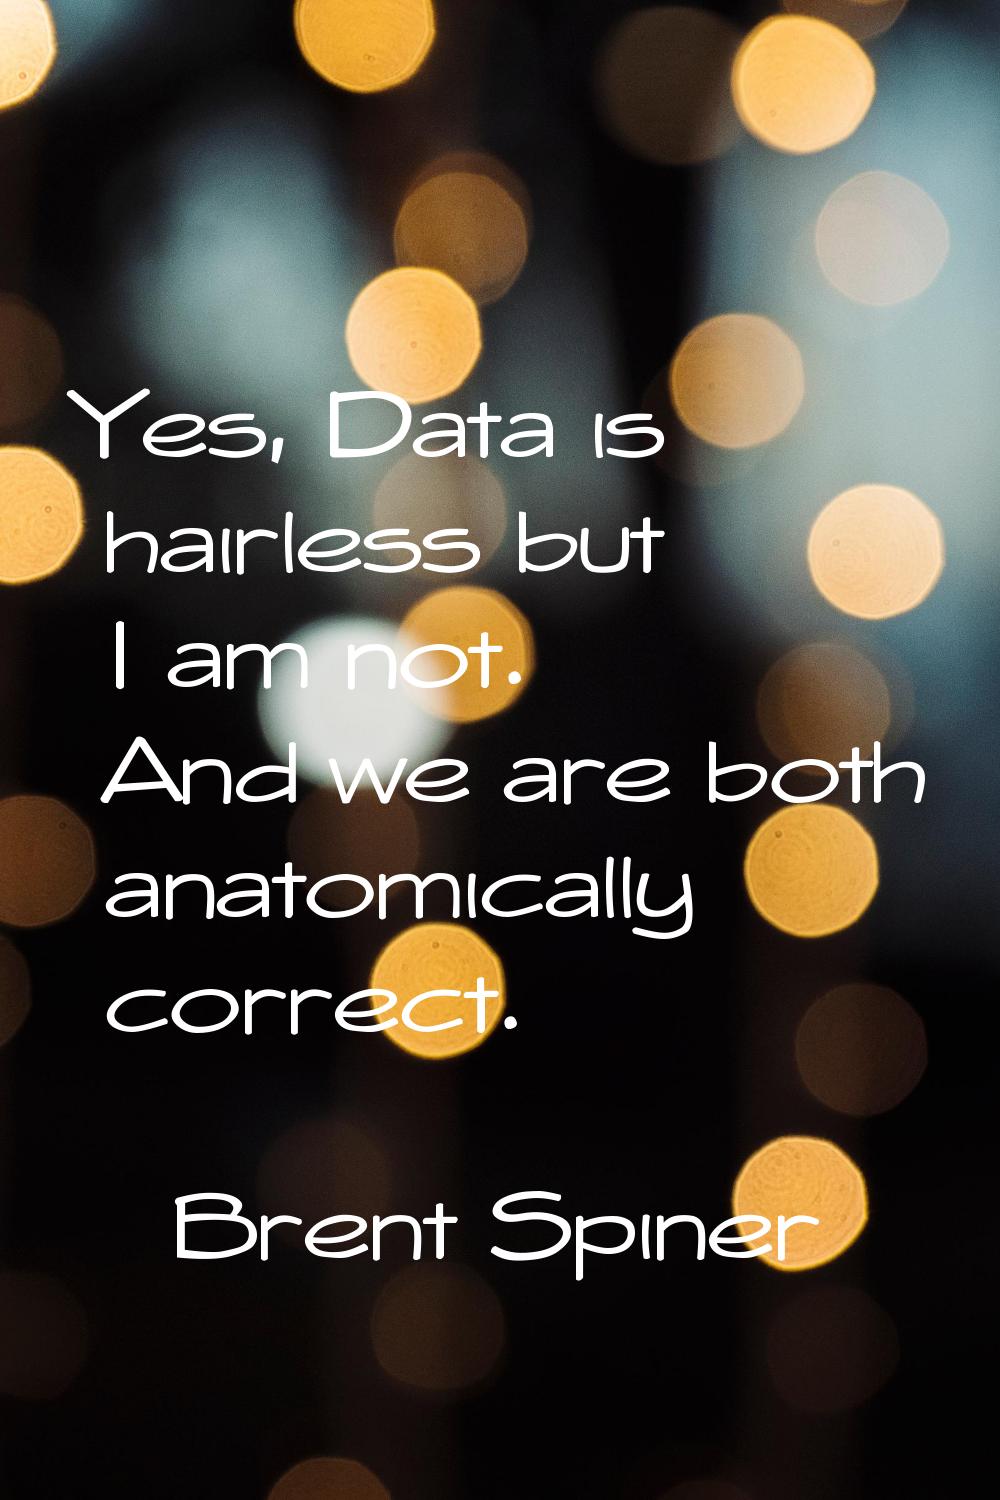 Yes, Data is hairless but I am not. And we are both anatomically correct.